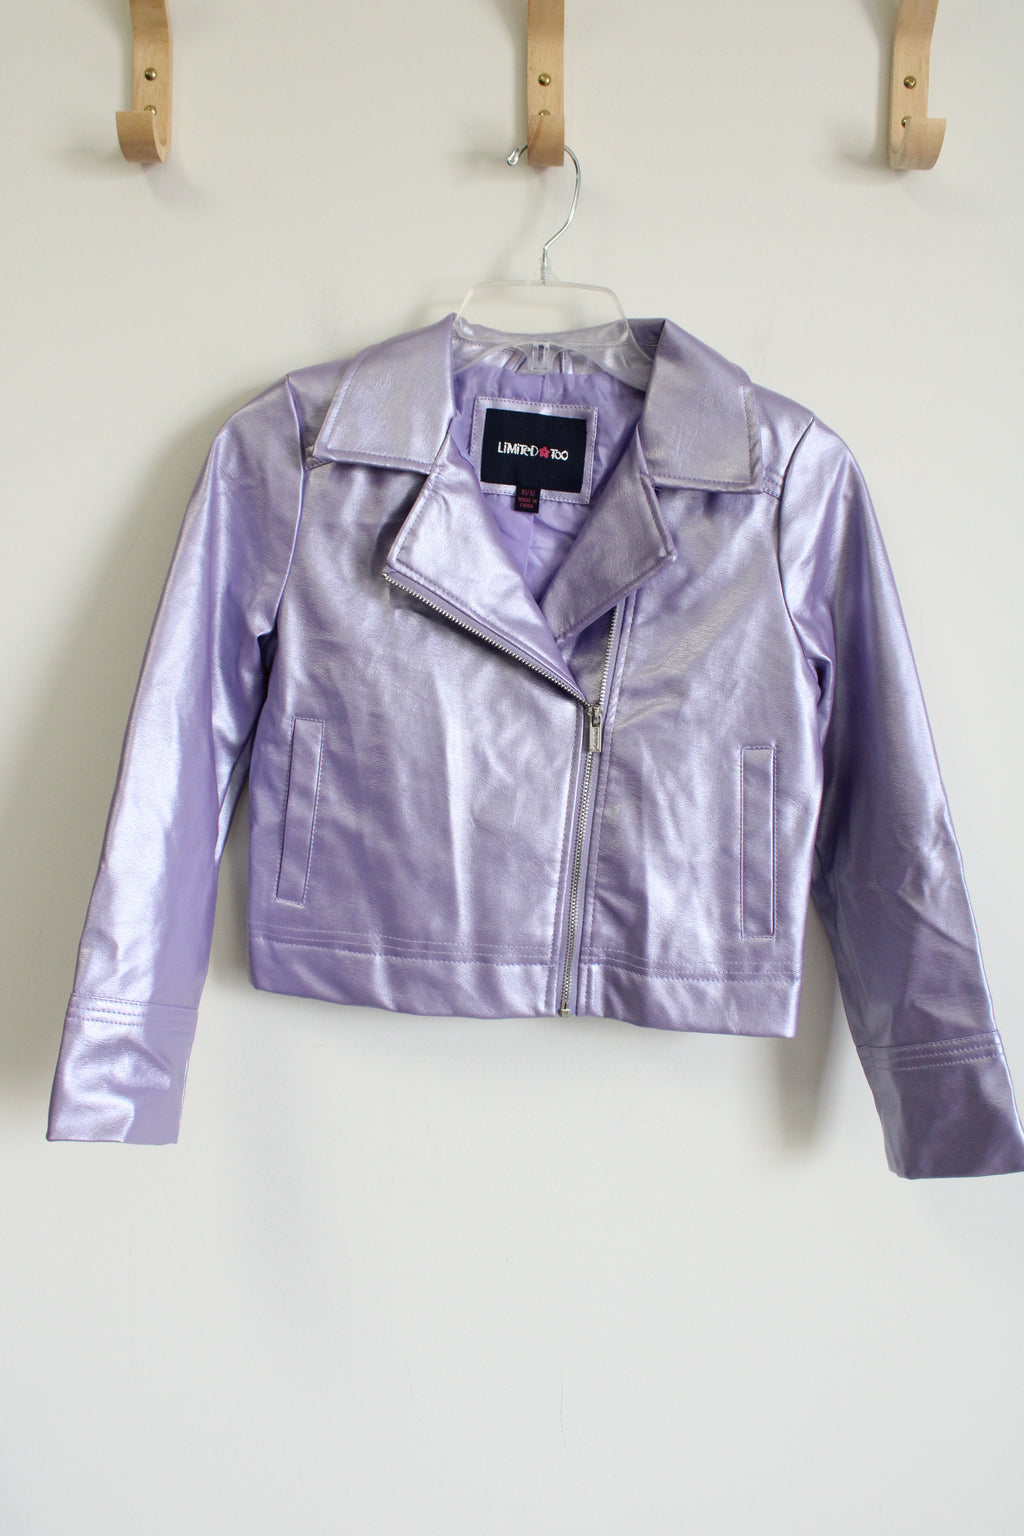 Limited Too Purple Pearlized Faux Leather Jacket | 10/12